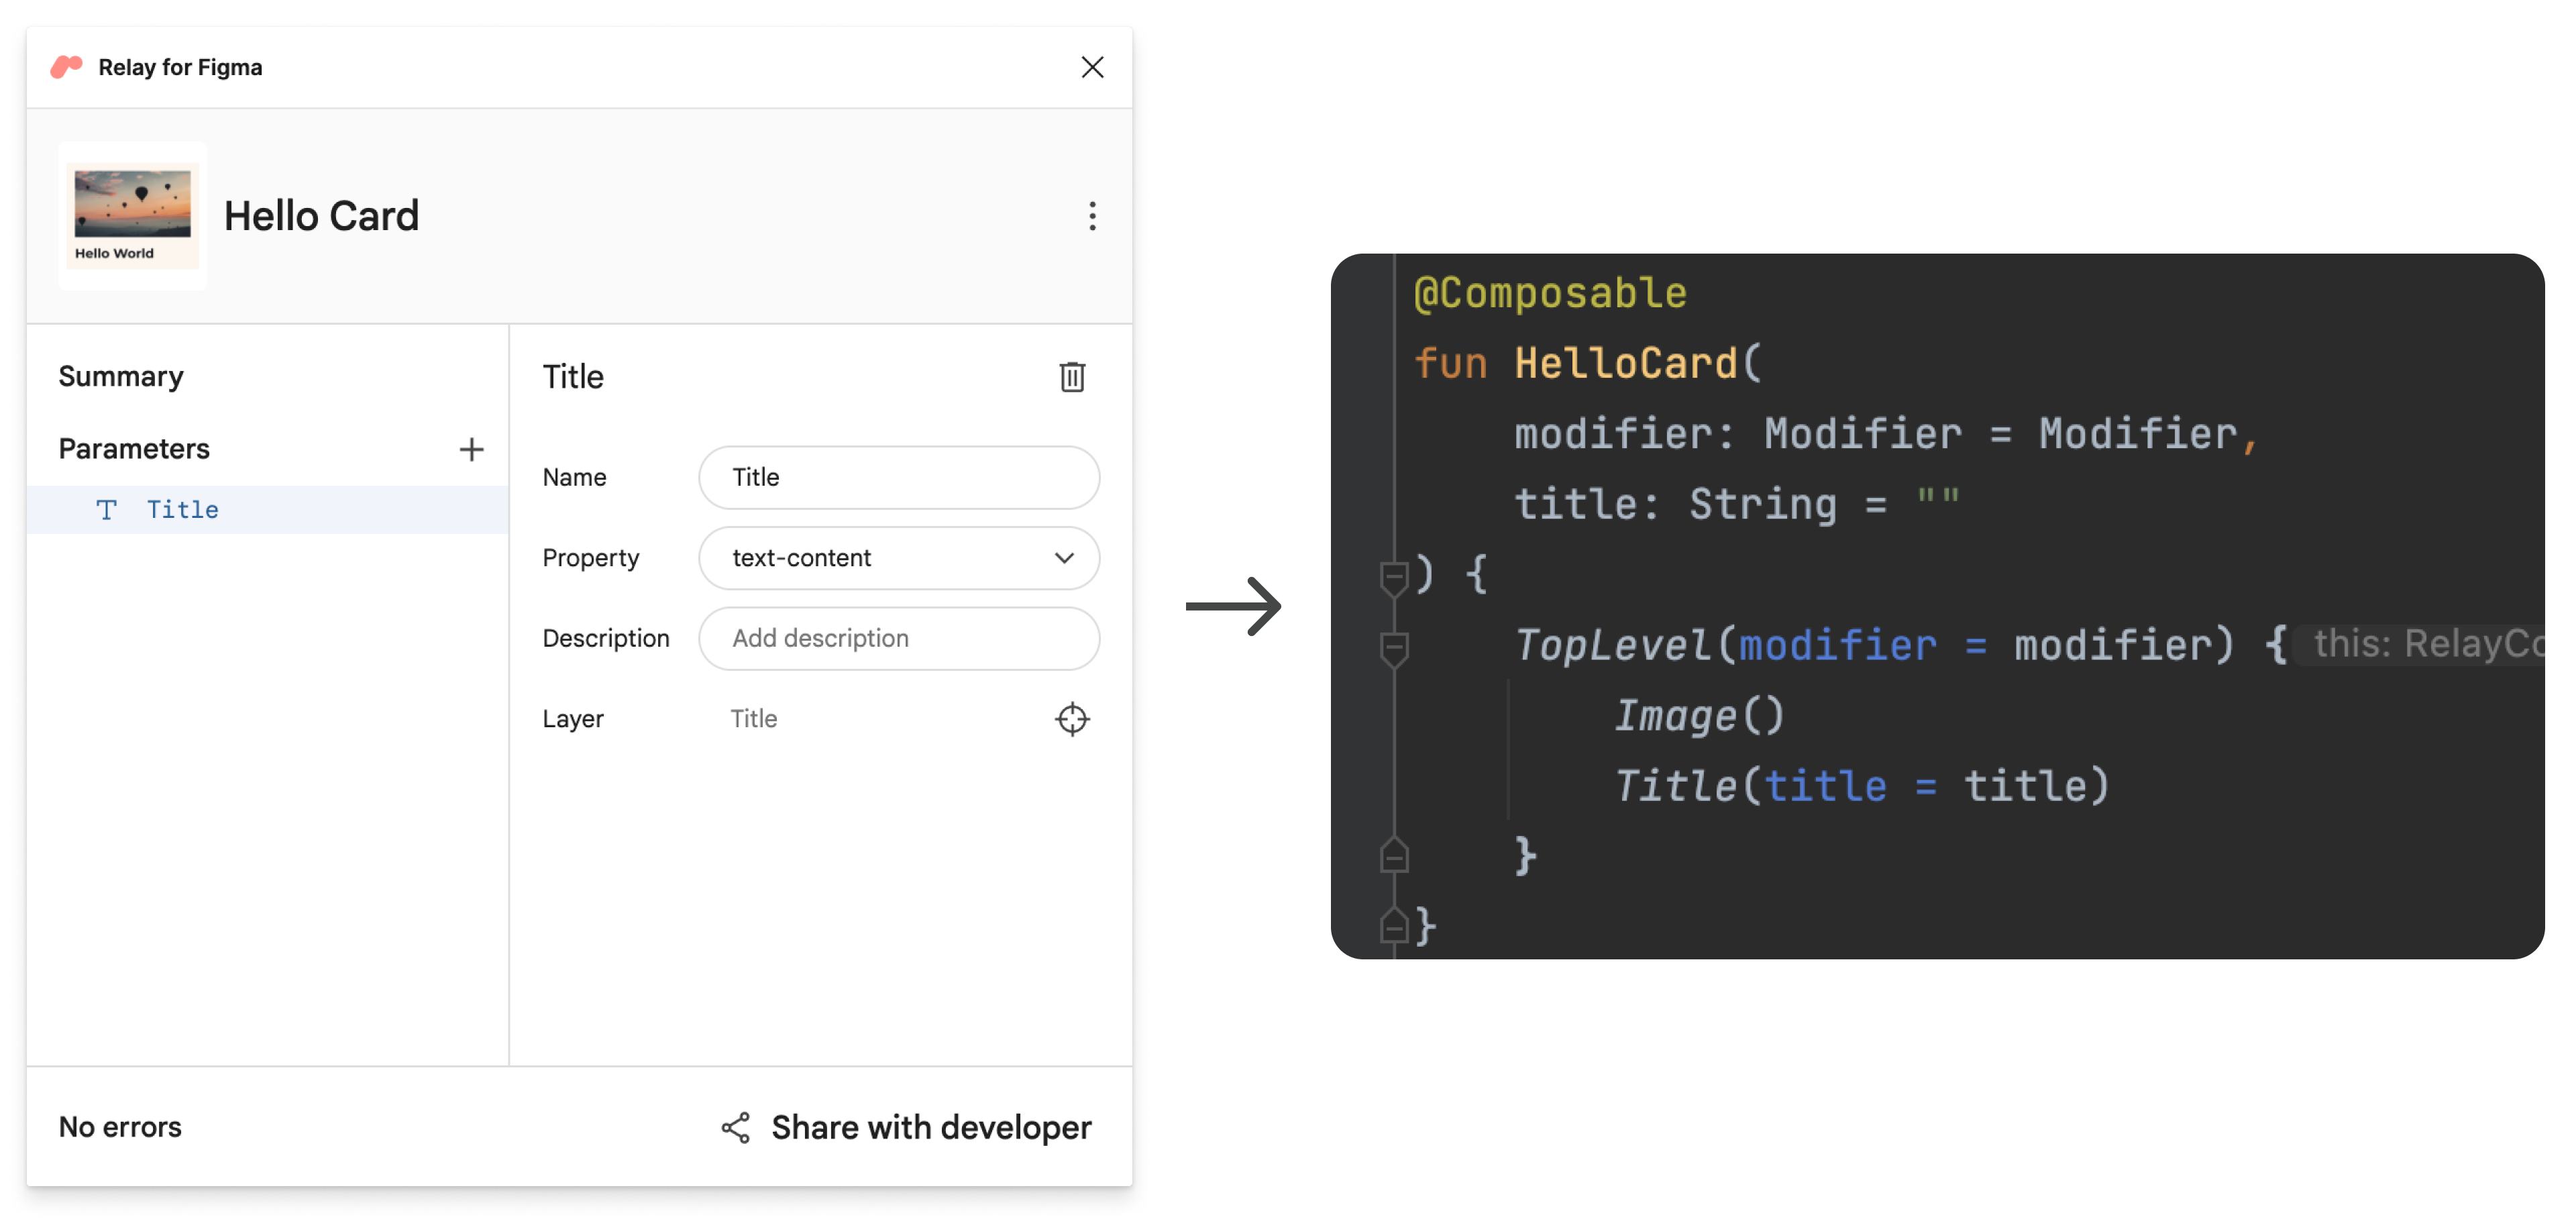 Title parameter in Figma and in the generated code